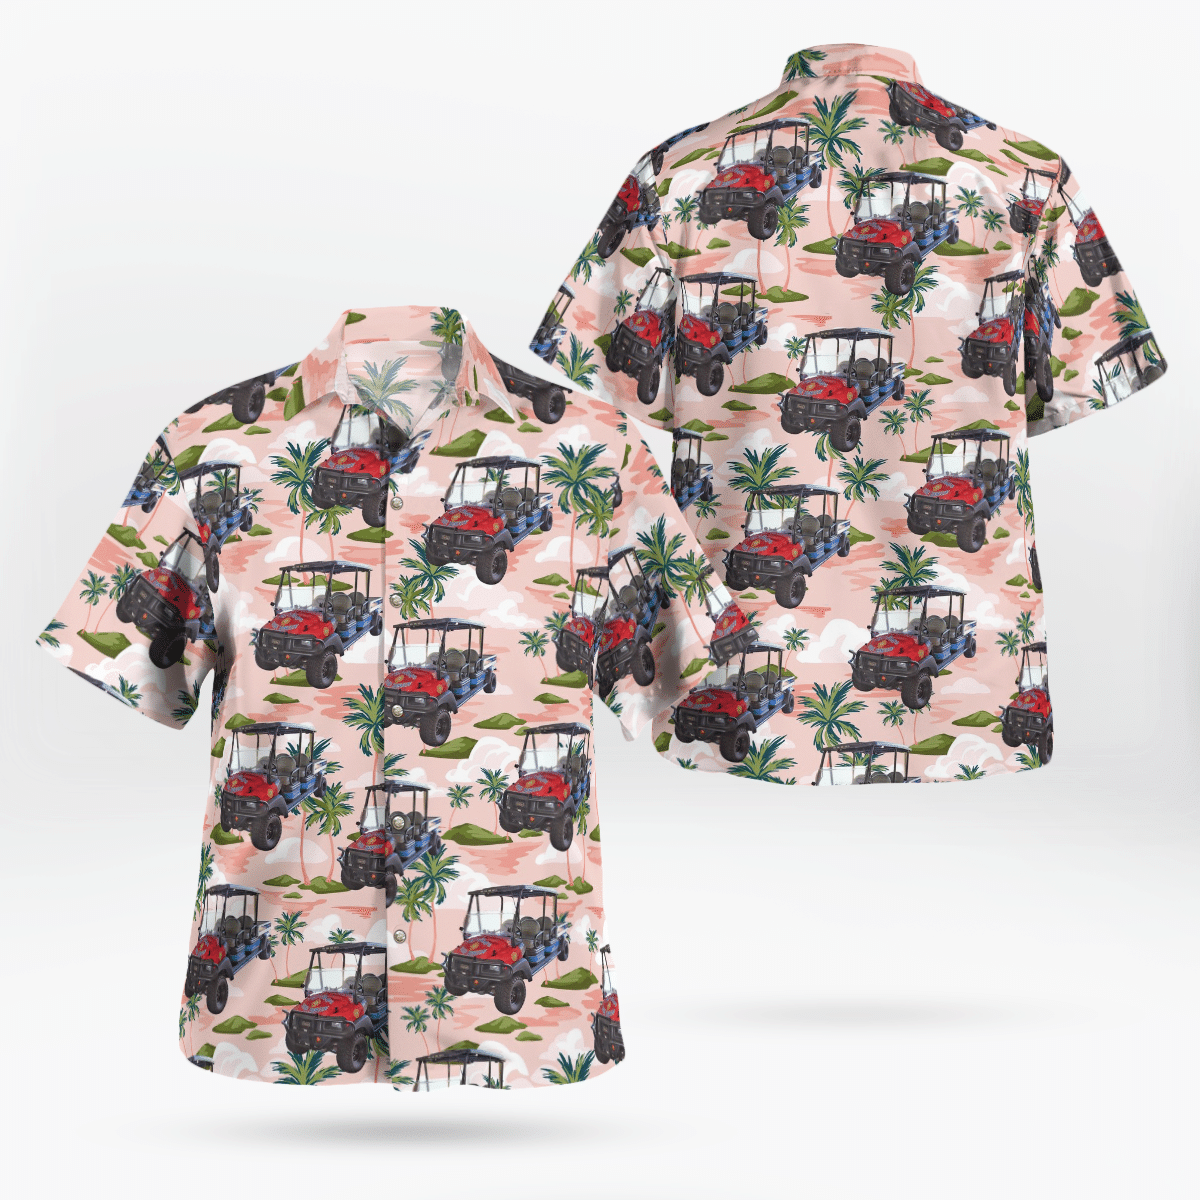 If you want to be noticed, wear These Trendy Hawaiian Shirt 114